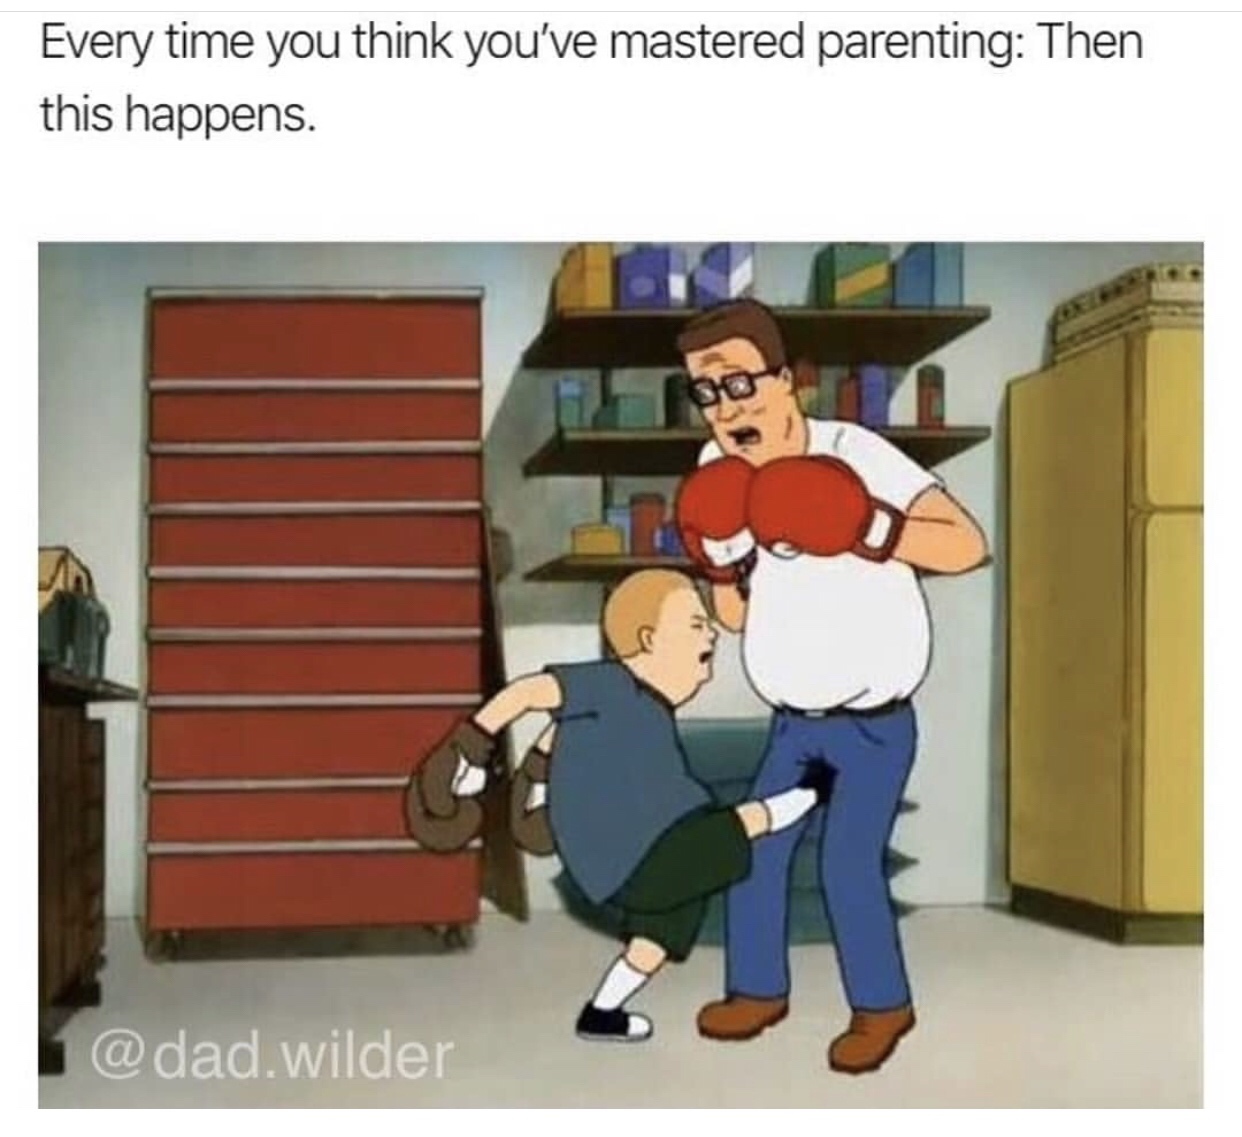 king of the hill bobby - Every time you think you've mastered parenting Then this happens. .wilder